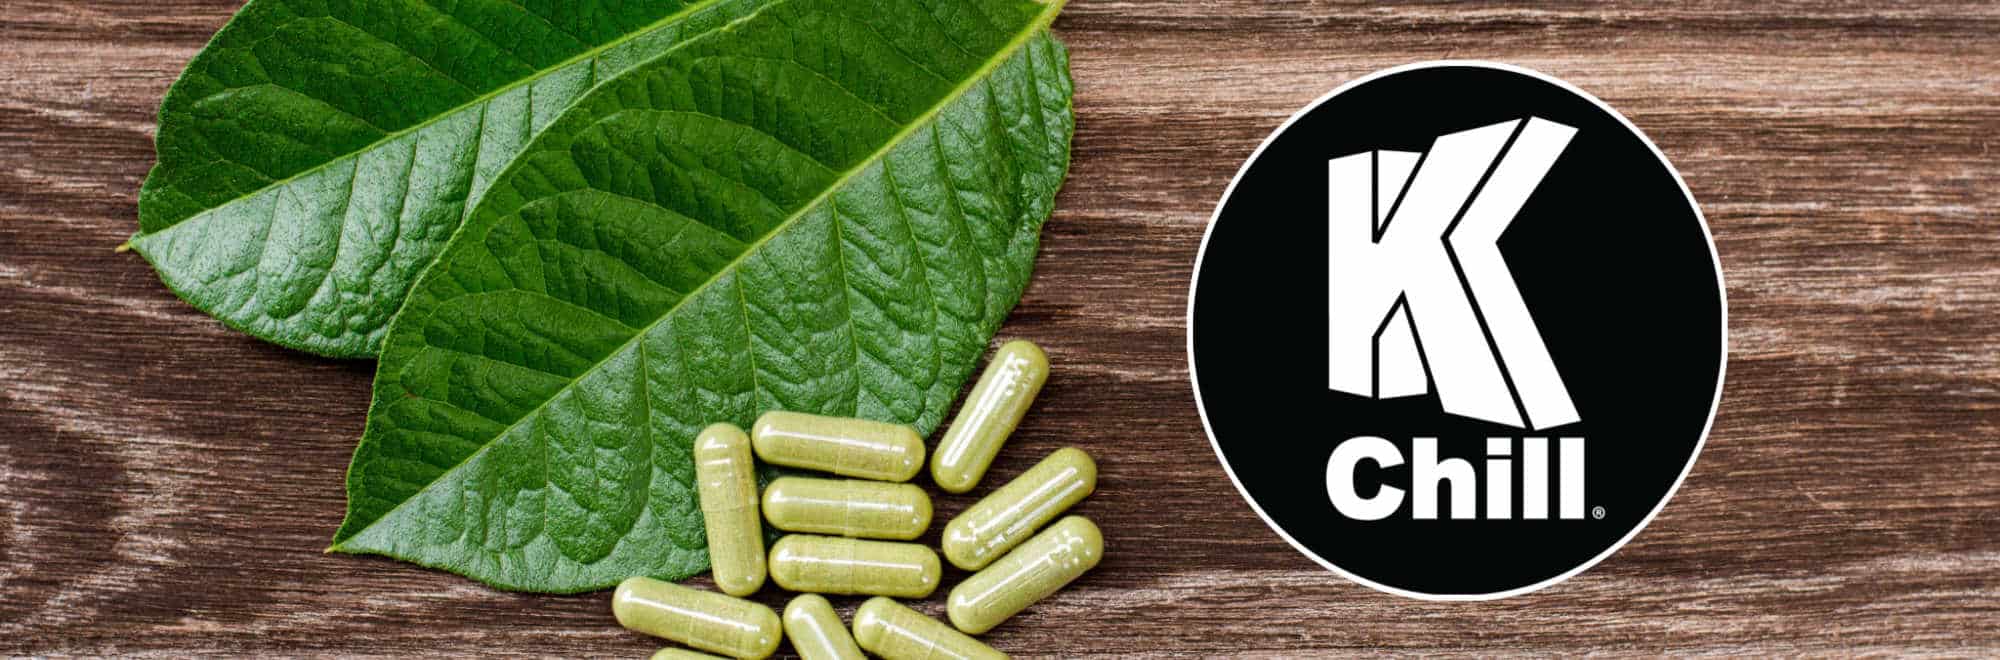 image of k chill kratom leaves and capsules